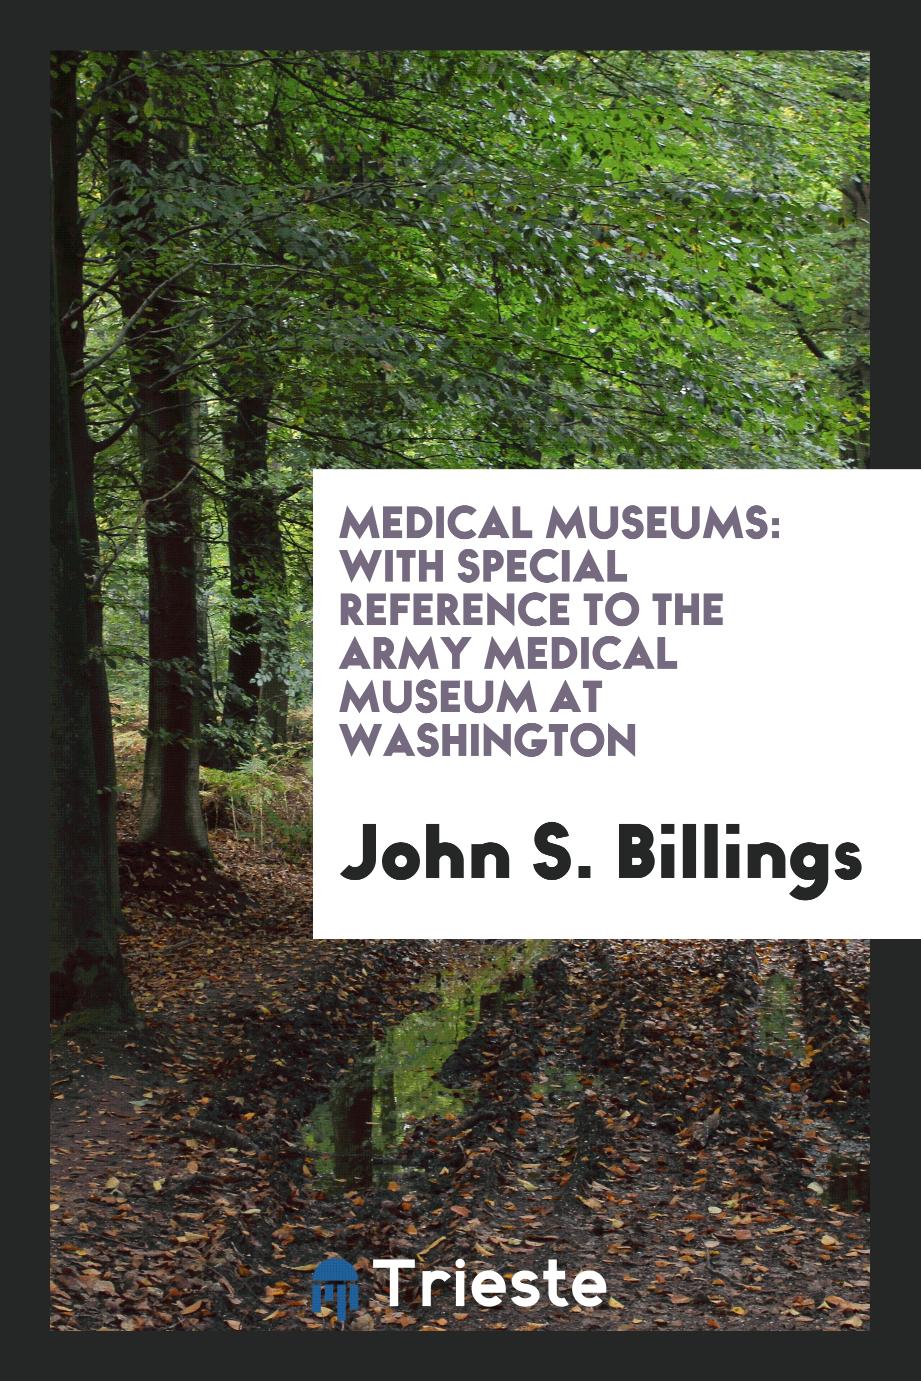 Medical museums: With Special Reference to the Army Medical Museum at Washington